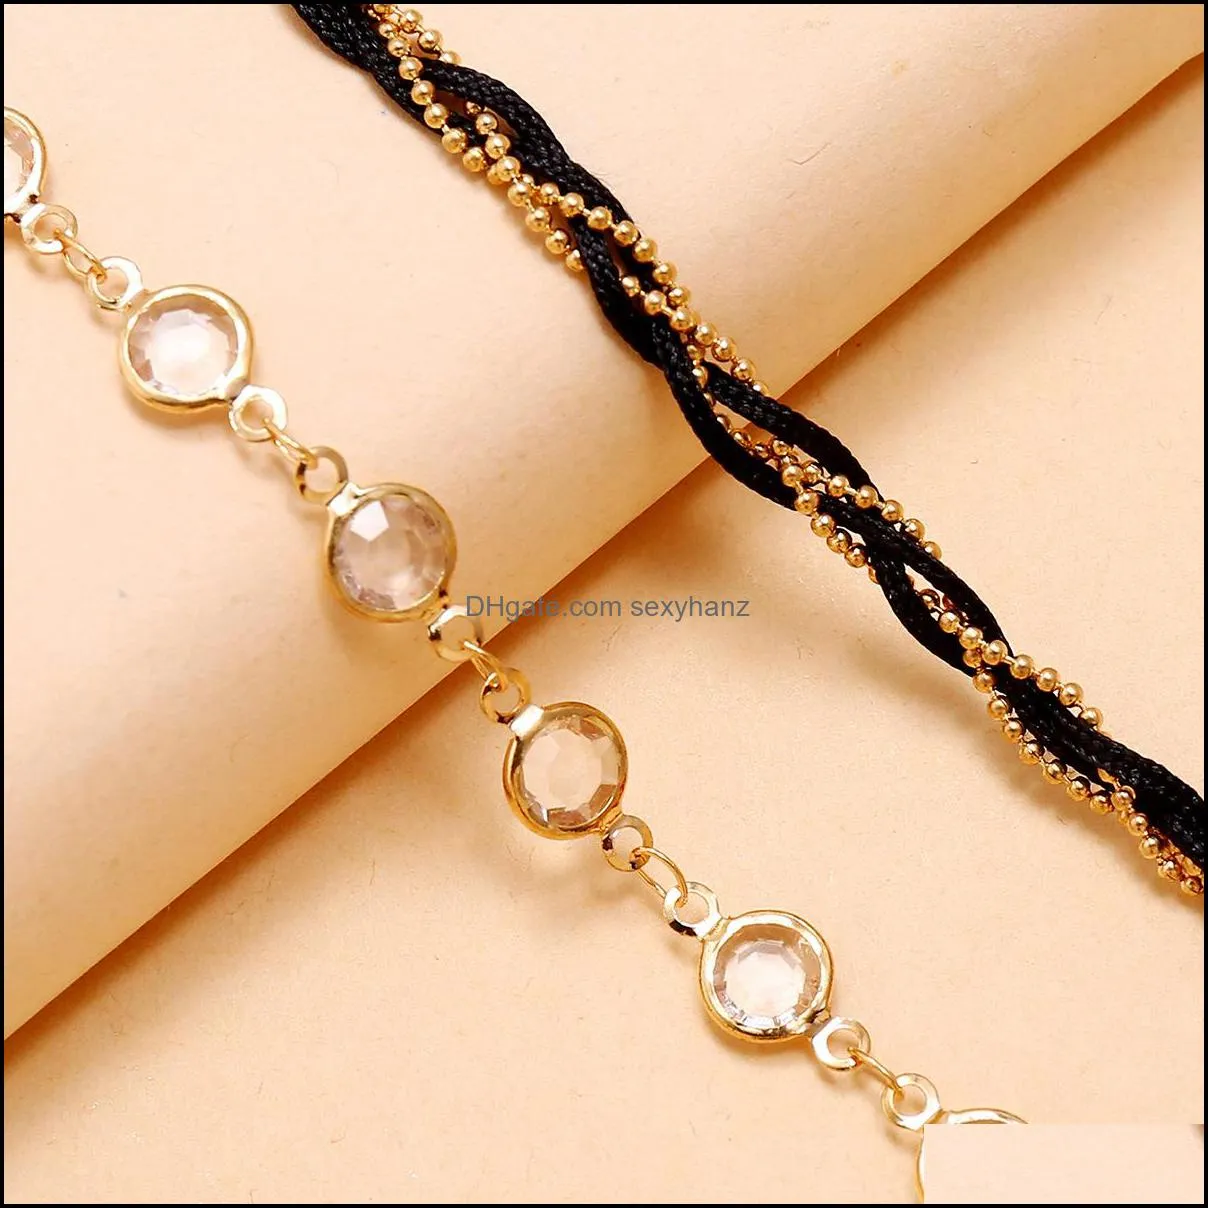 S1660 Hot Fashion Jewelry Handmade Beads Chain Transparent Rhinstone Double Layer Anklet Beach Anklets